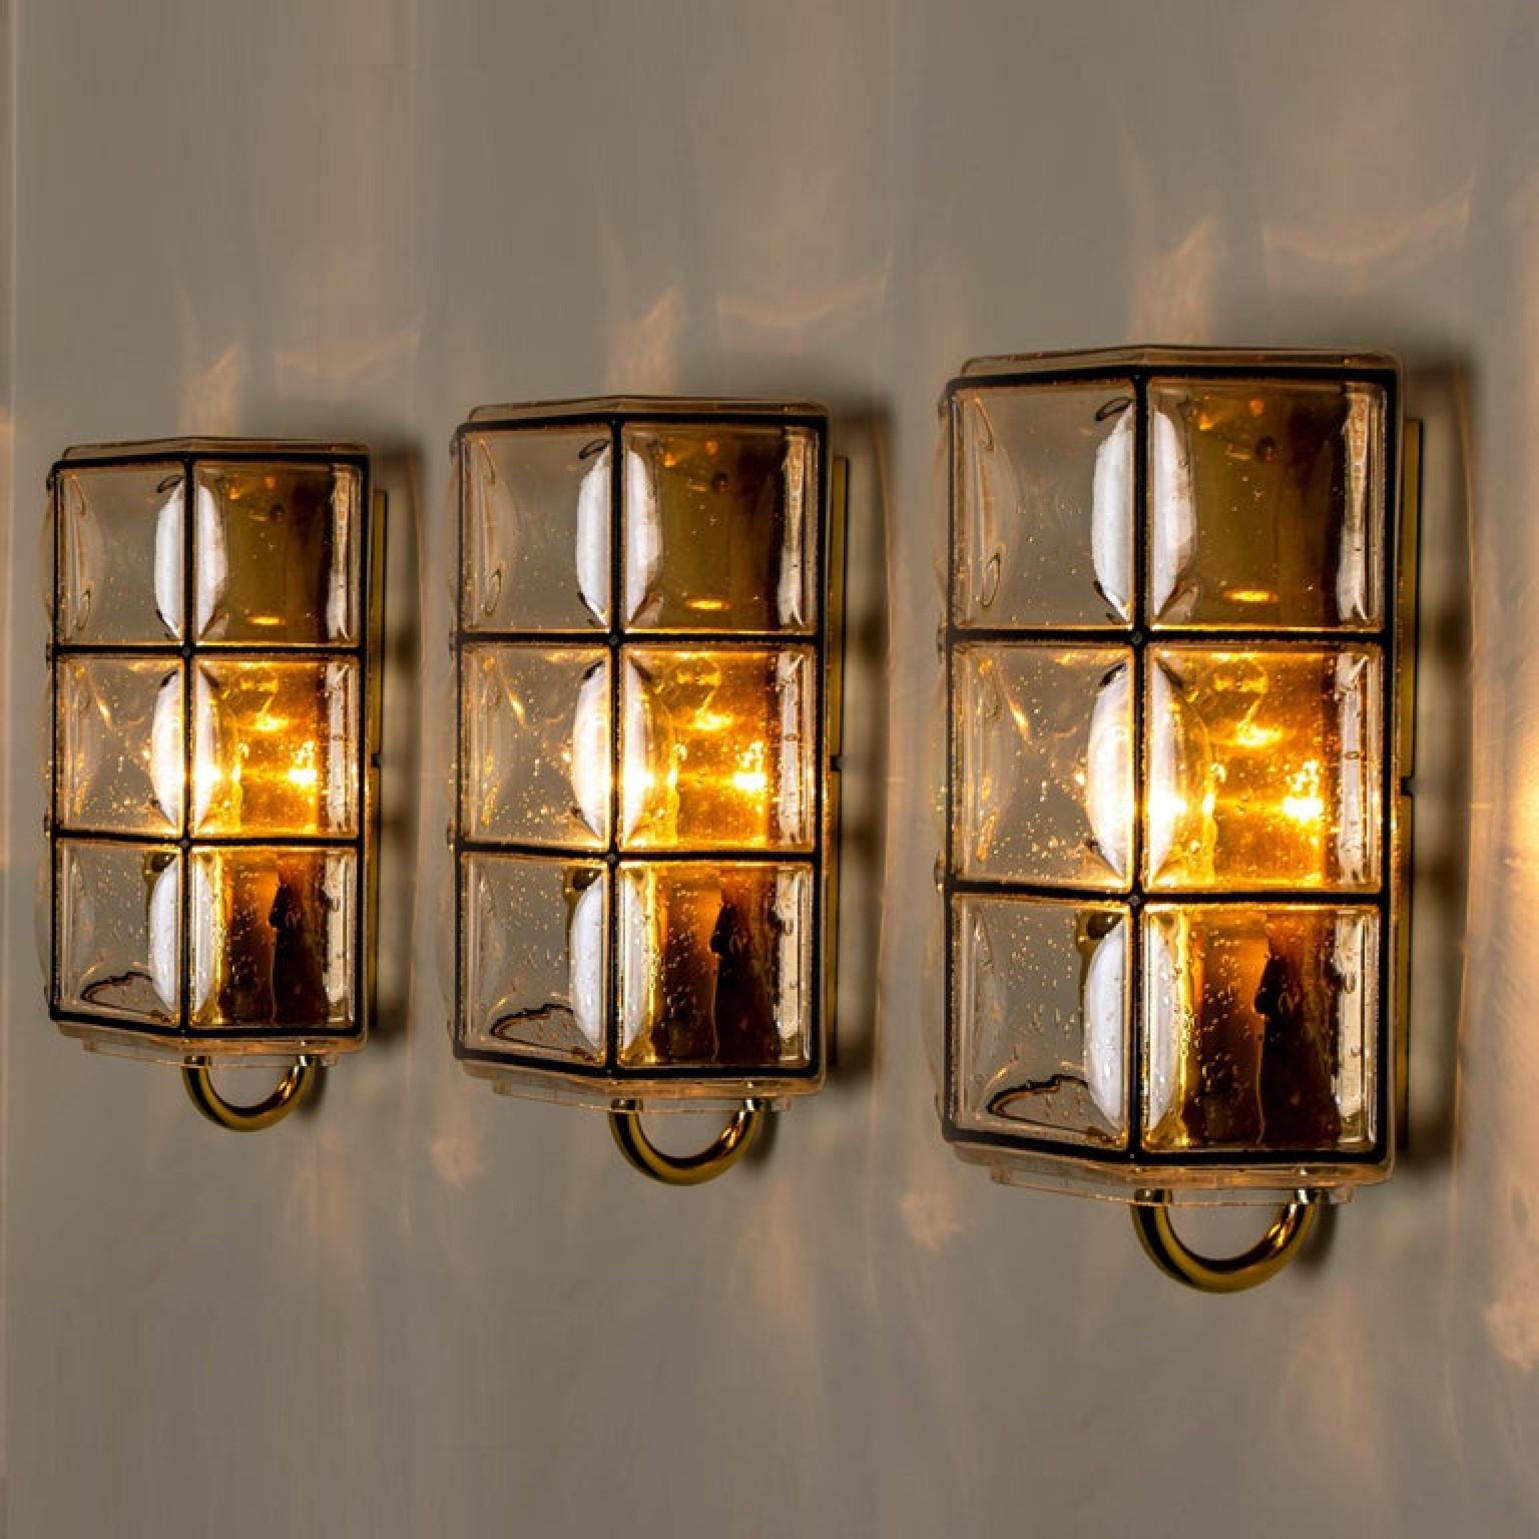 20th Century 1 of the 8 of Iron and Bubble Glass Sconces Wall Lamps by Limburg, Germany, 1960 For Sale